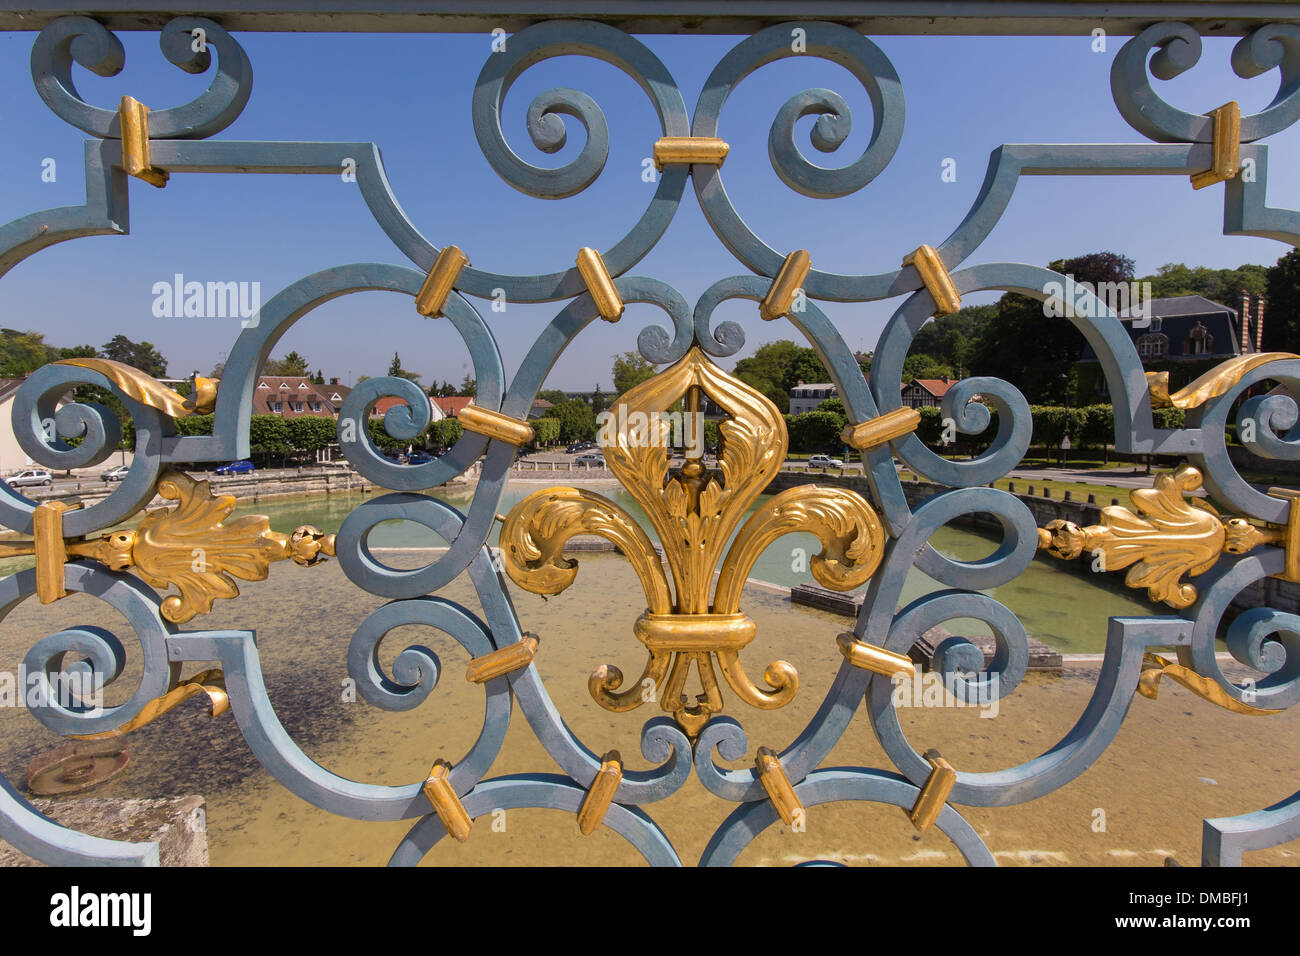 FLEUR DE LYS ON THE BALUSTRADE OF THE DRINKING TROUGH OF MARLY, WORK BY JULES HARDOUIN-MANSART, NATIONAL ESTATE OF MARLY-LE-ROI, ROYAL PARK SERVING AS VACATION SPOT FOR LOUIS XIV, MARLY-LE-ROI, YVELINES (78), FRANCE Stock Photo